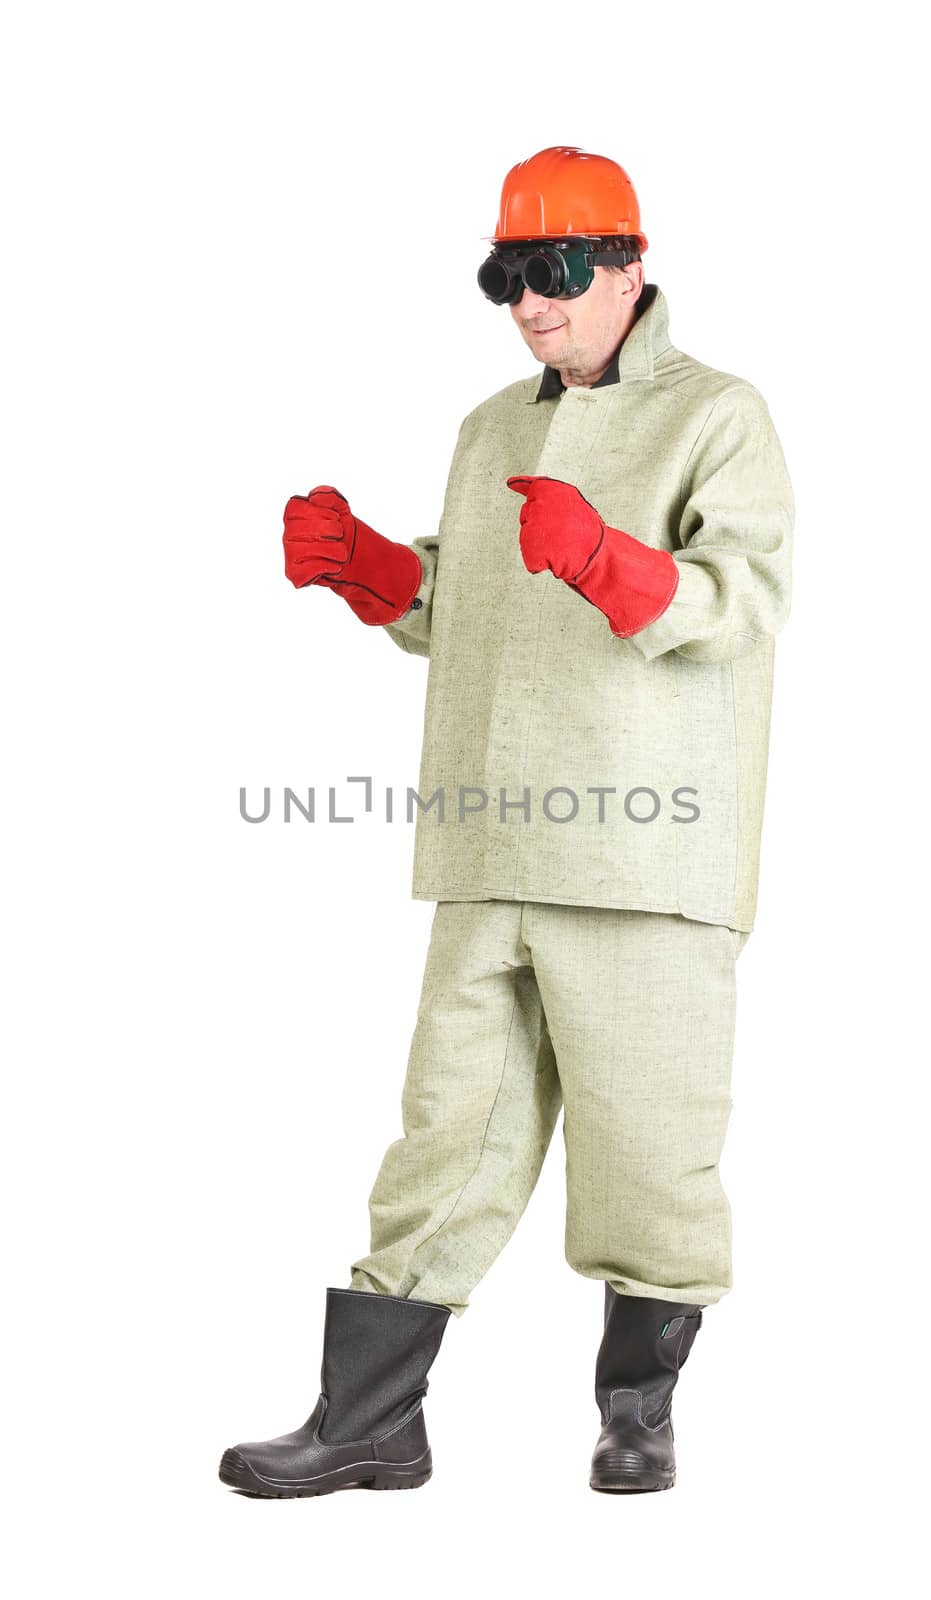 Welder in red protective helmet. Isolated on a white background.